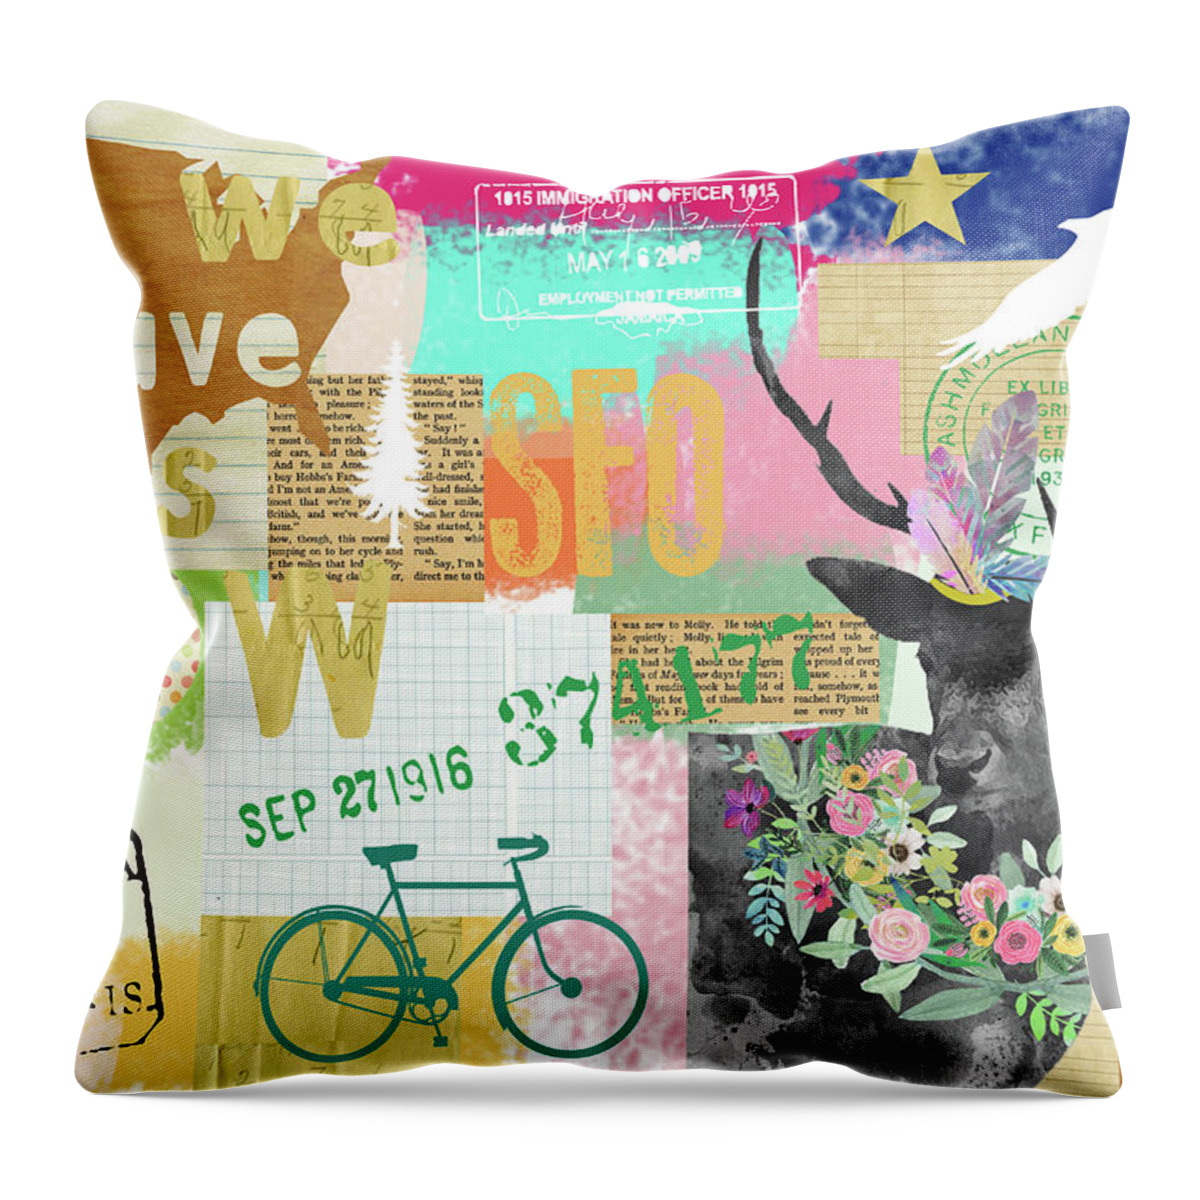 All We Have Is Now Throw Pillow featuring the mixed media All We Have Is Now by Claudia Schoen